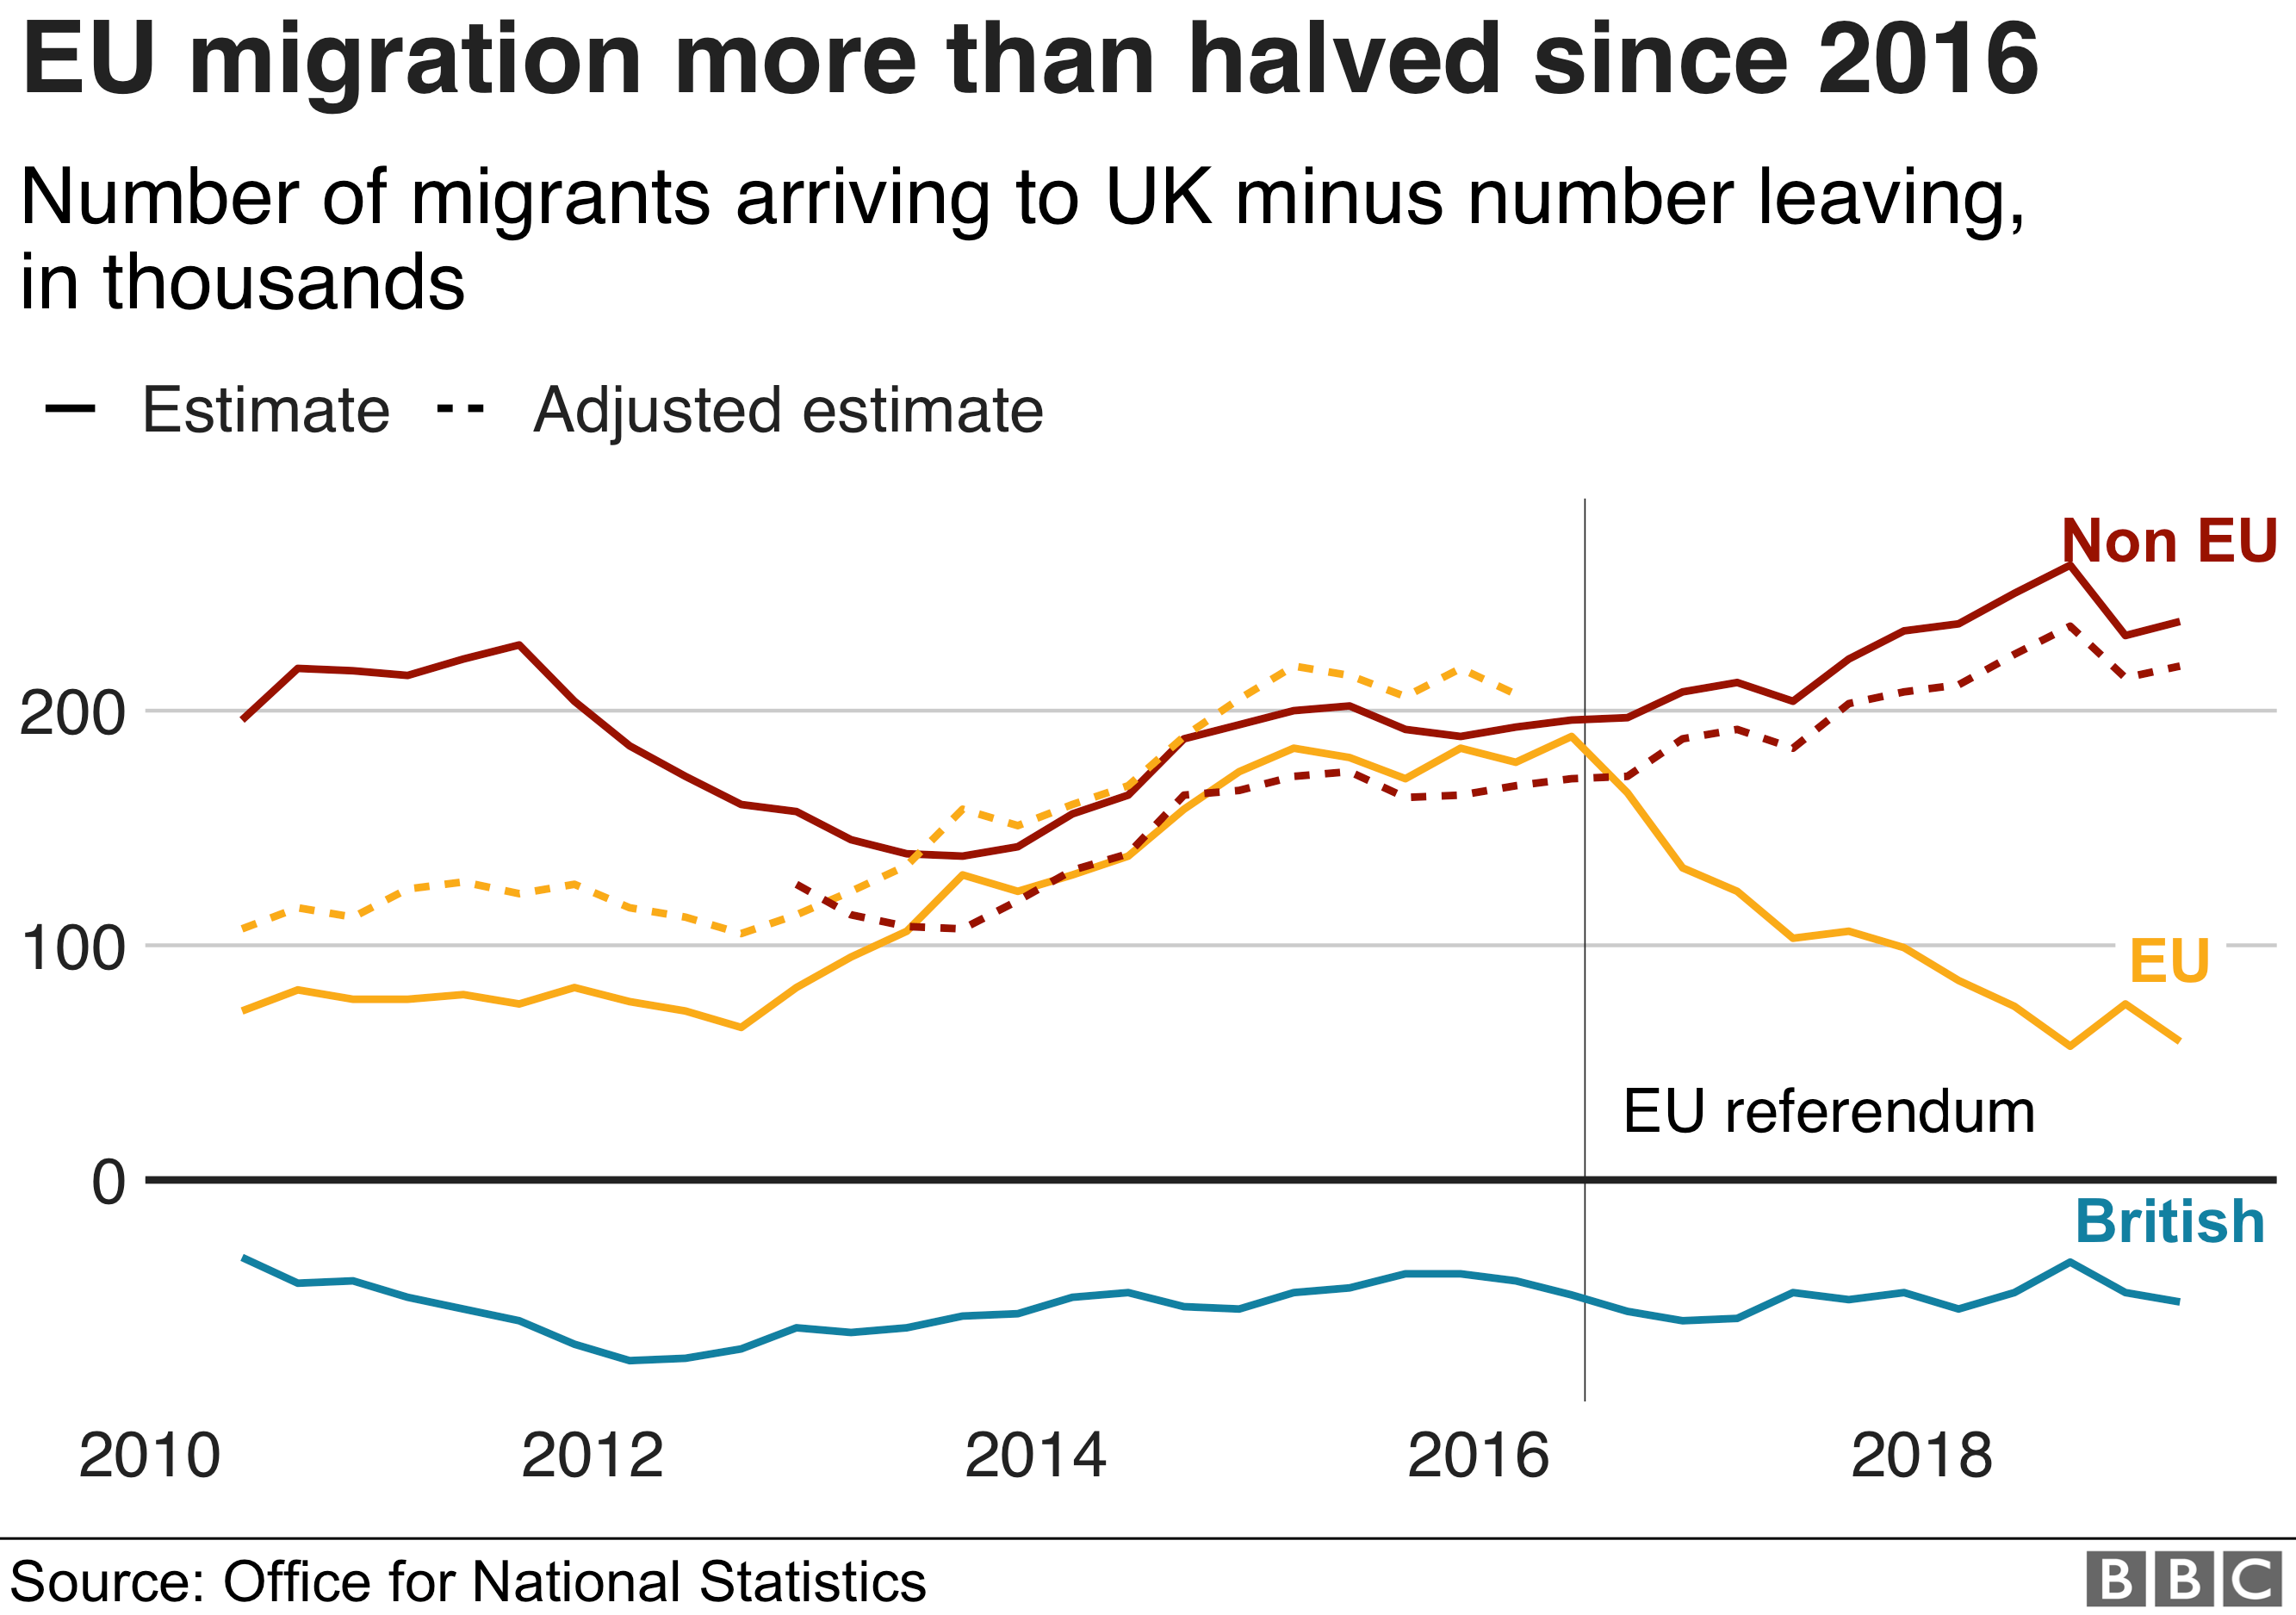 Graph showing the changes in EU migration since 2016